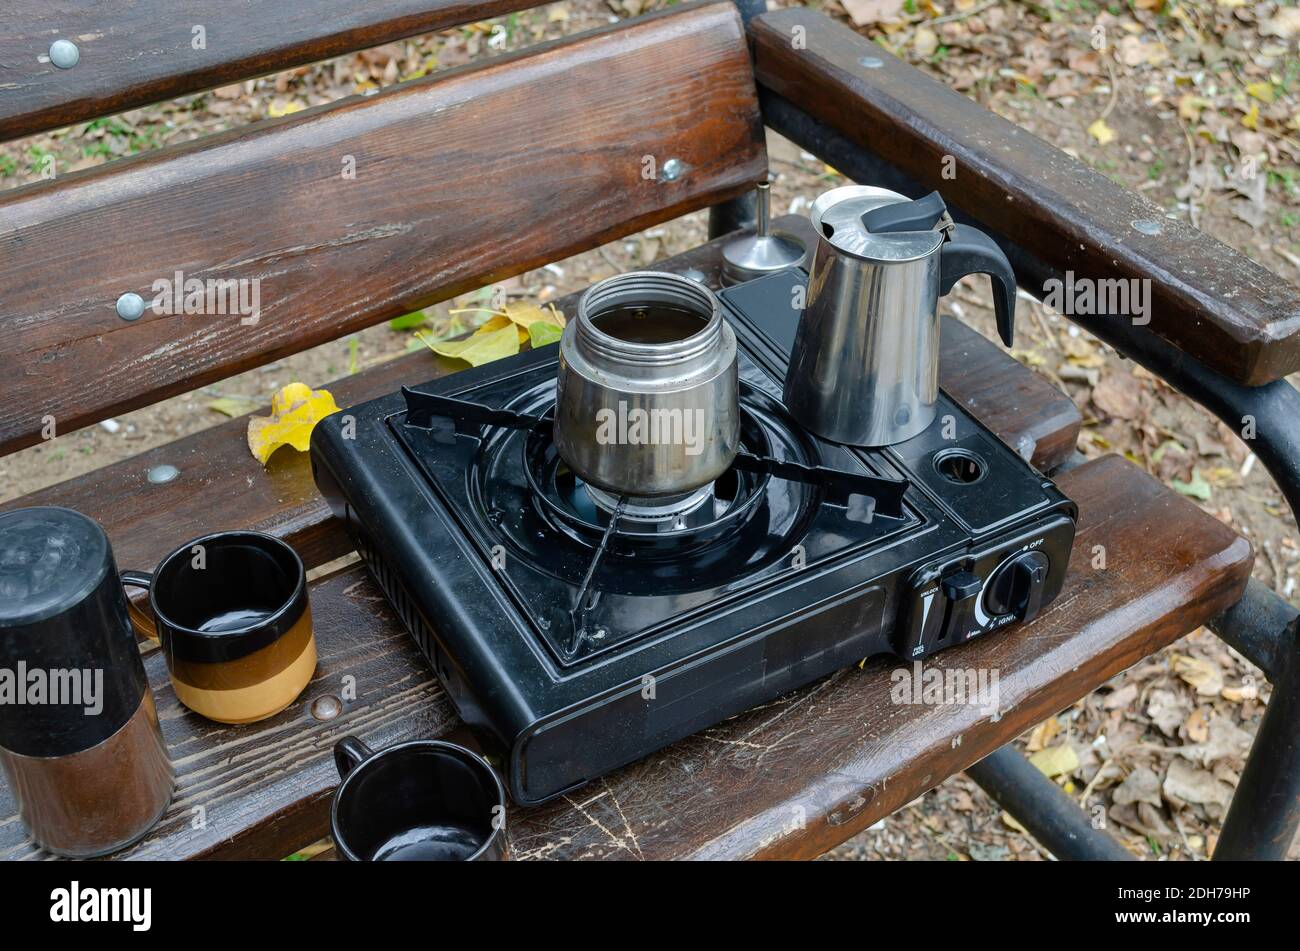 https://c8.alamy.com/comp/2DH79HP/geyser-metal-coffee-maker-and-portable-gas-stove-on-park-bench-process-of-making-natural-coffee-during-picnic-or-trip-lifestyle-2DH79HP.jpg